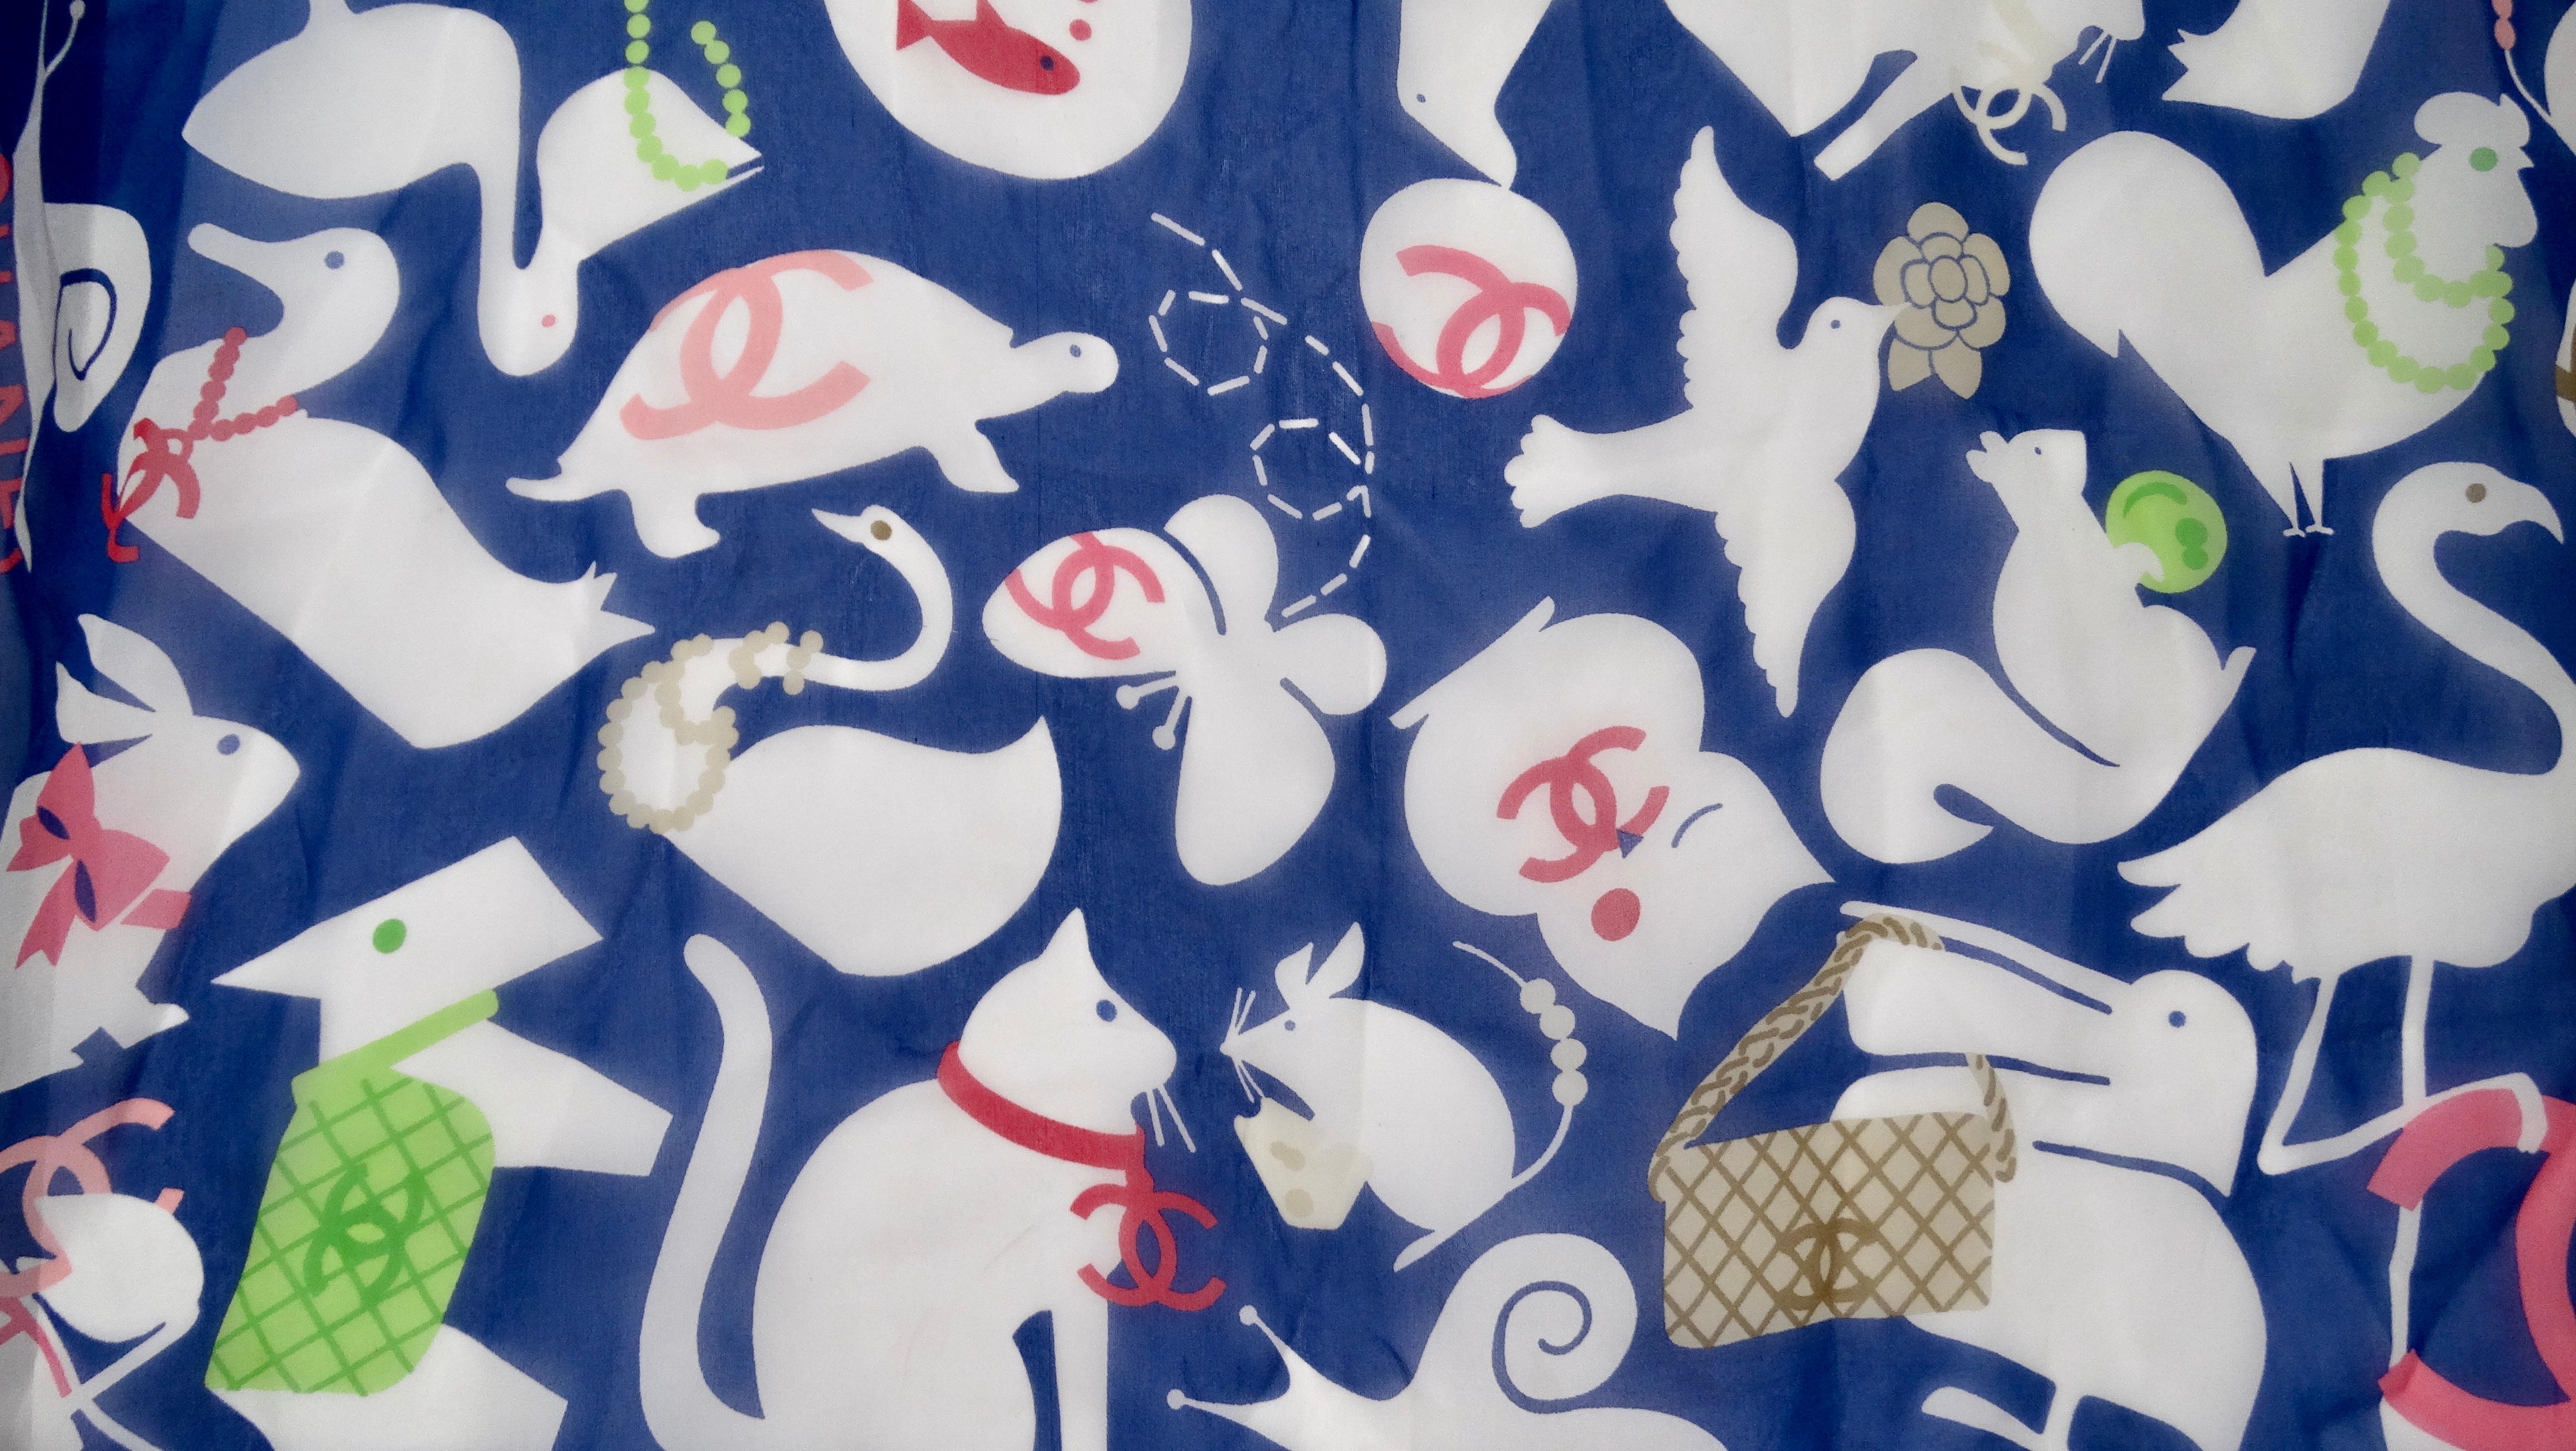 Add this adorable Chanel to your collection! Circa 2005/2006, this Silk blue scarf features a charming motif of baby animals complete with colorful accents and the signature CC logo with 'Chanel' in pink font. The perfect addition to all your